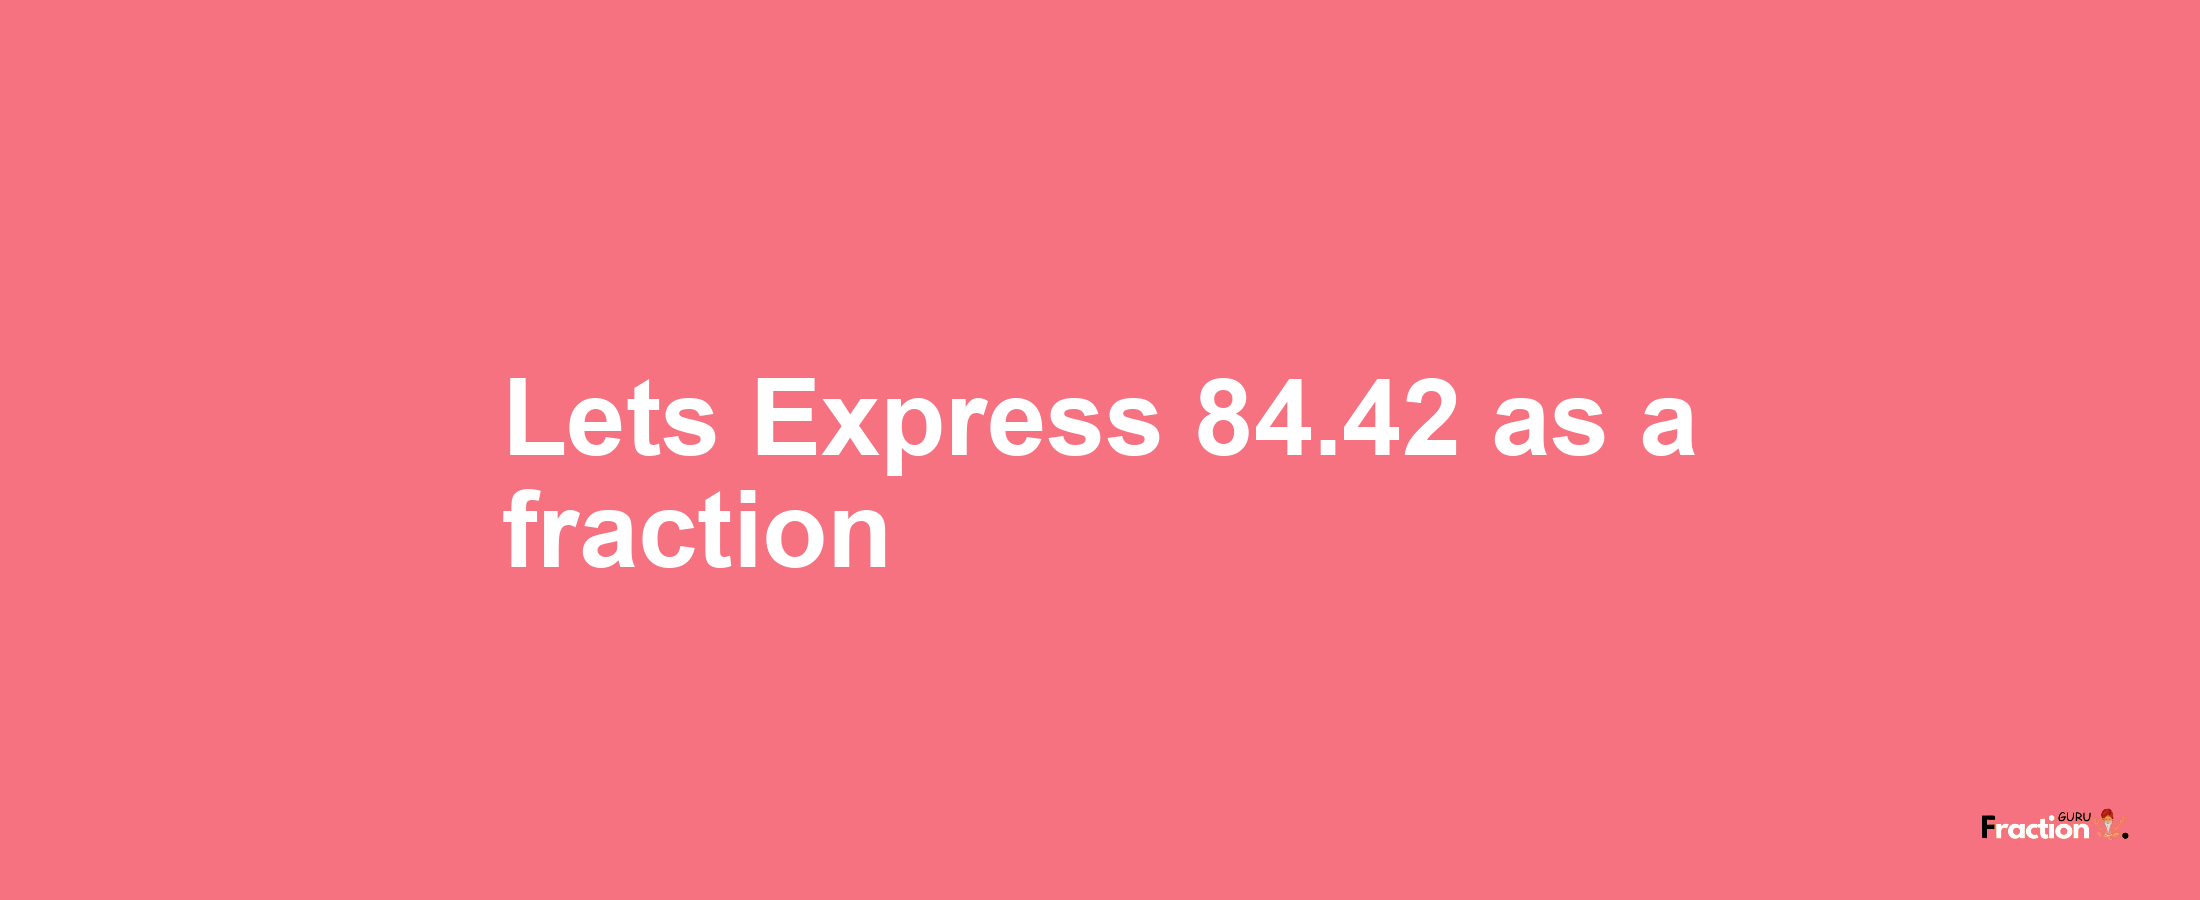 Lets Express 84.42 as afraction